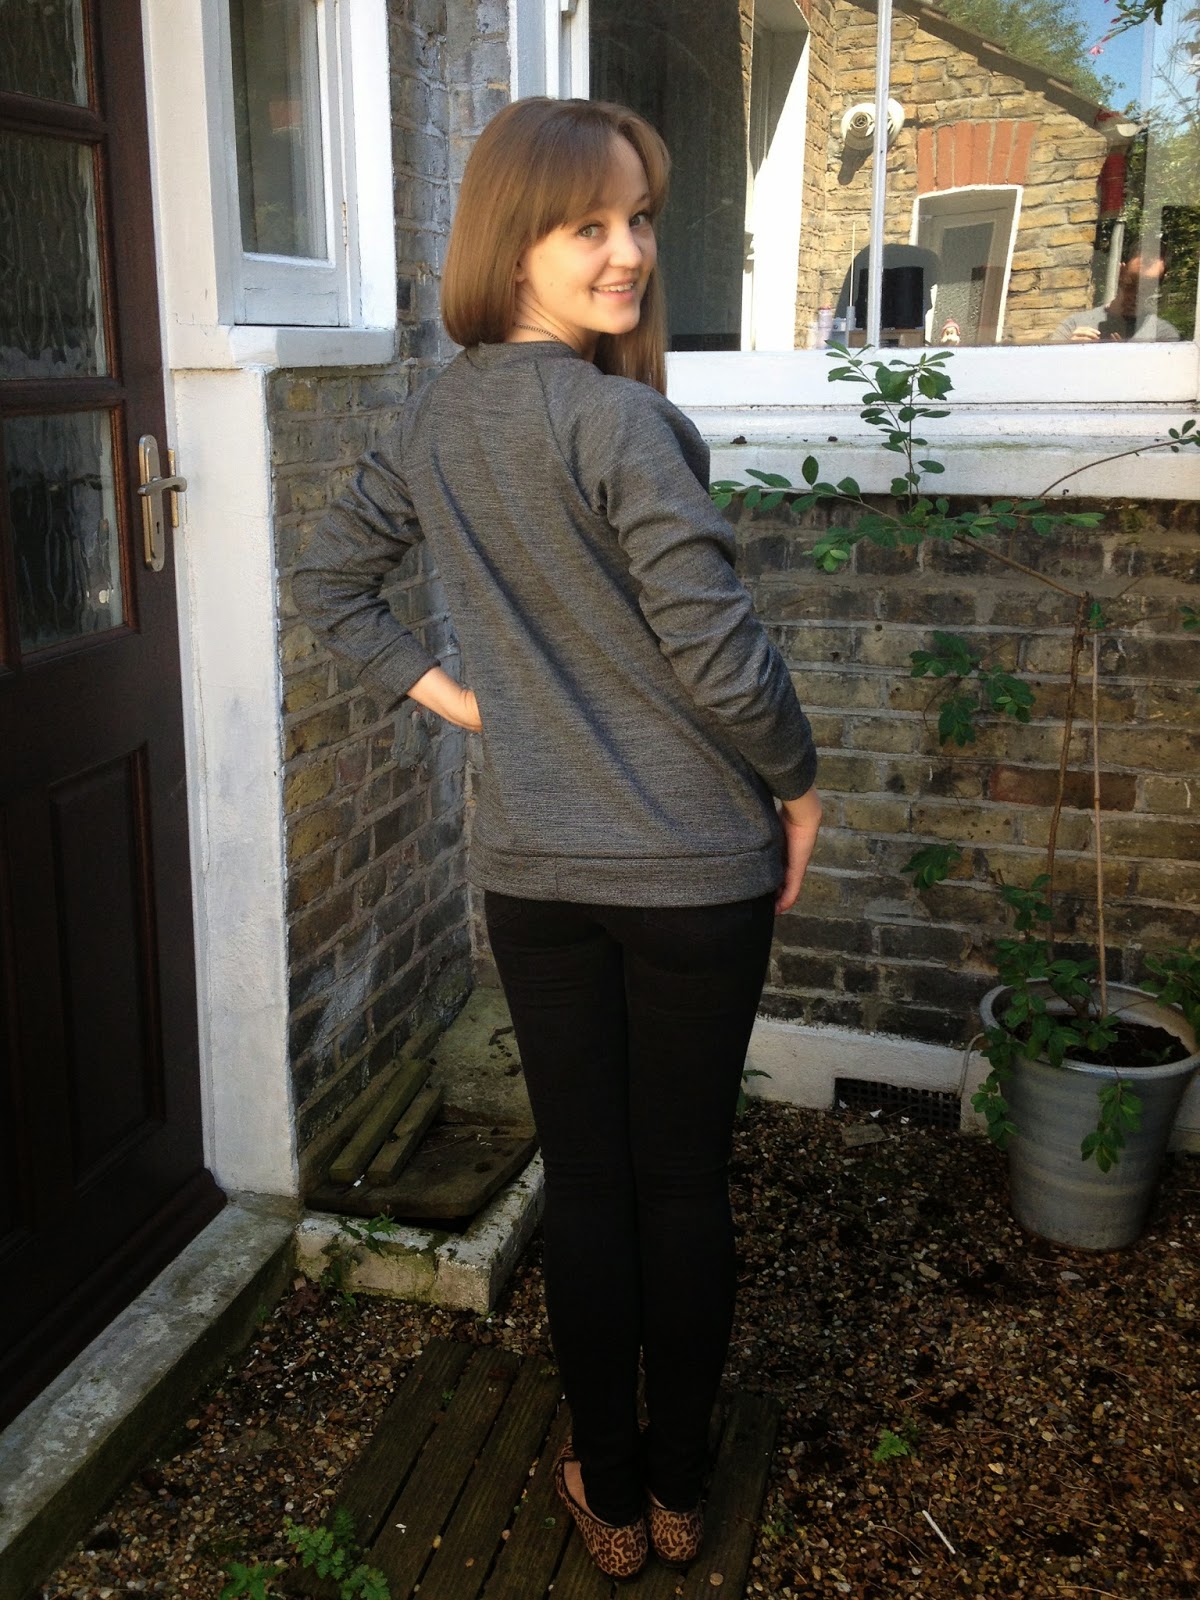 Diary of a Chainstitcher: The White Russian Sweatshirt from Capital Chic Sewing Patterns